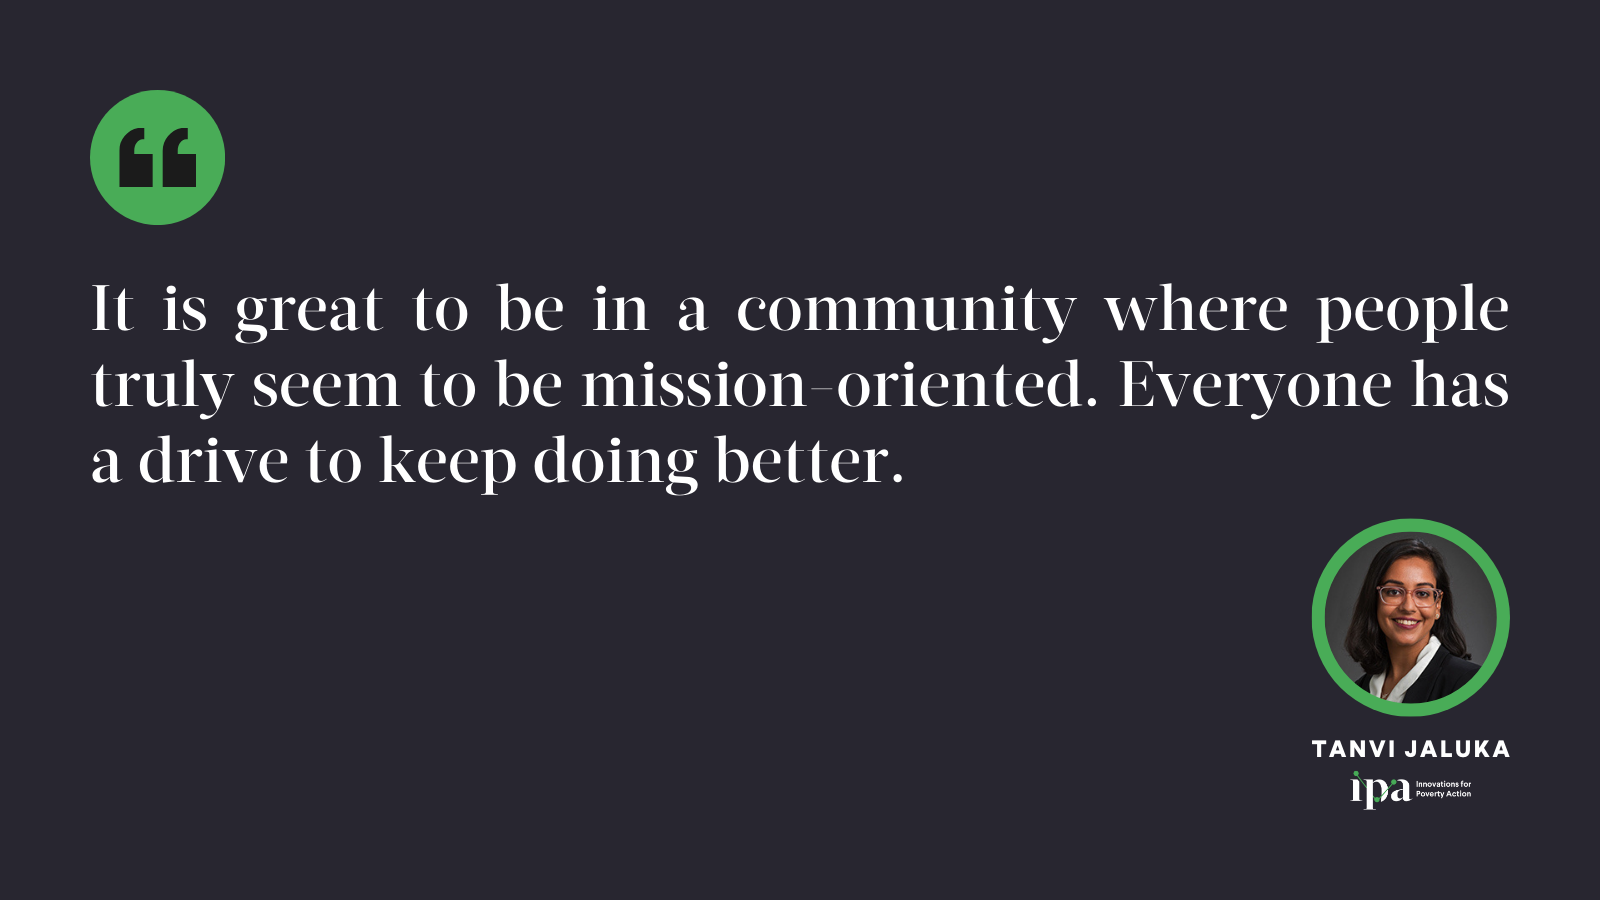 It is great to be in a community where people truly seem to be mission-oriented. Everyone has a drive to keep doing better